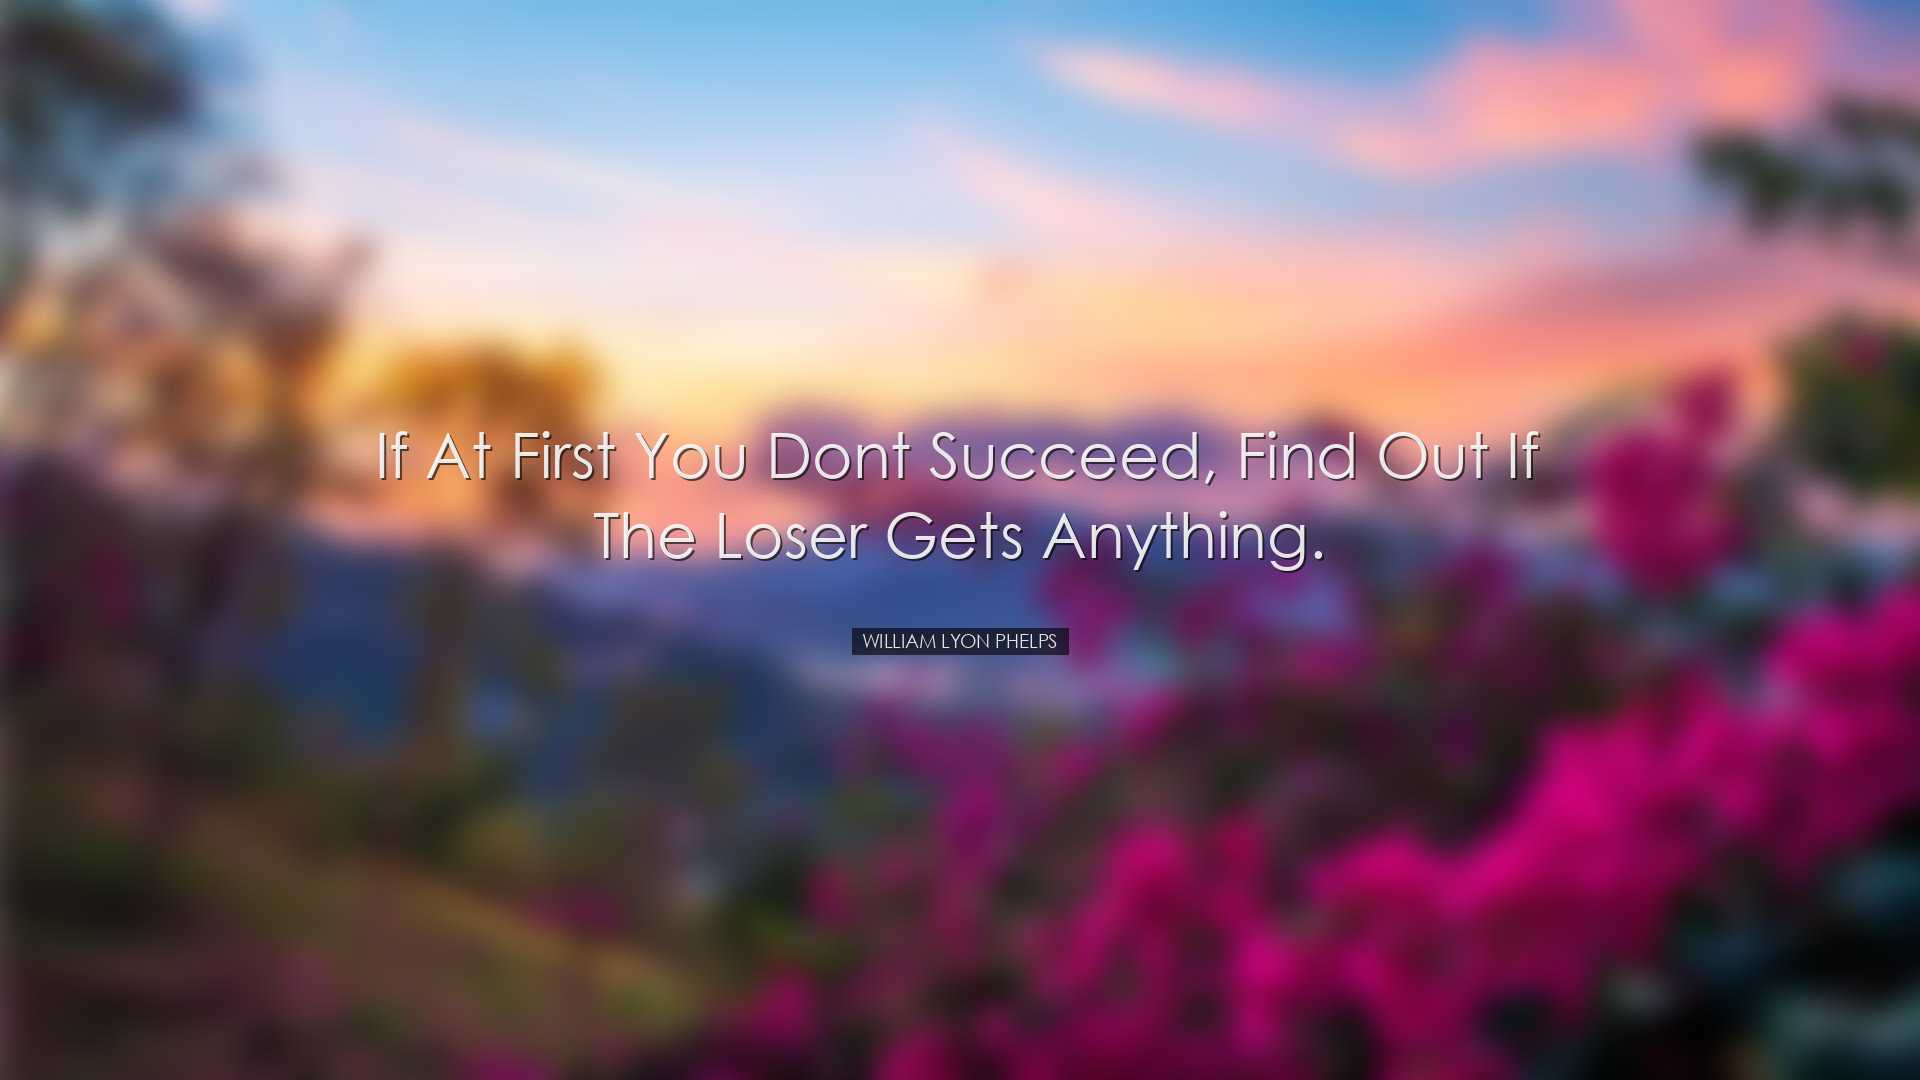 If at first you dont succeed, find out if the loser gets anything.